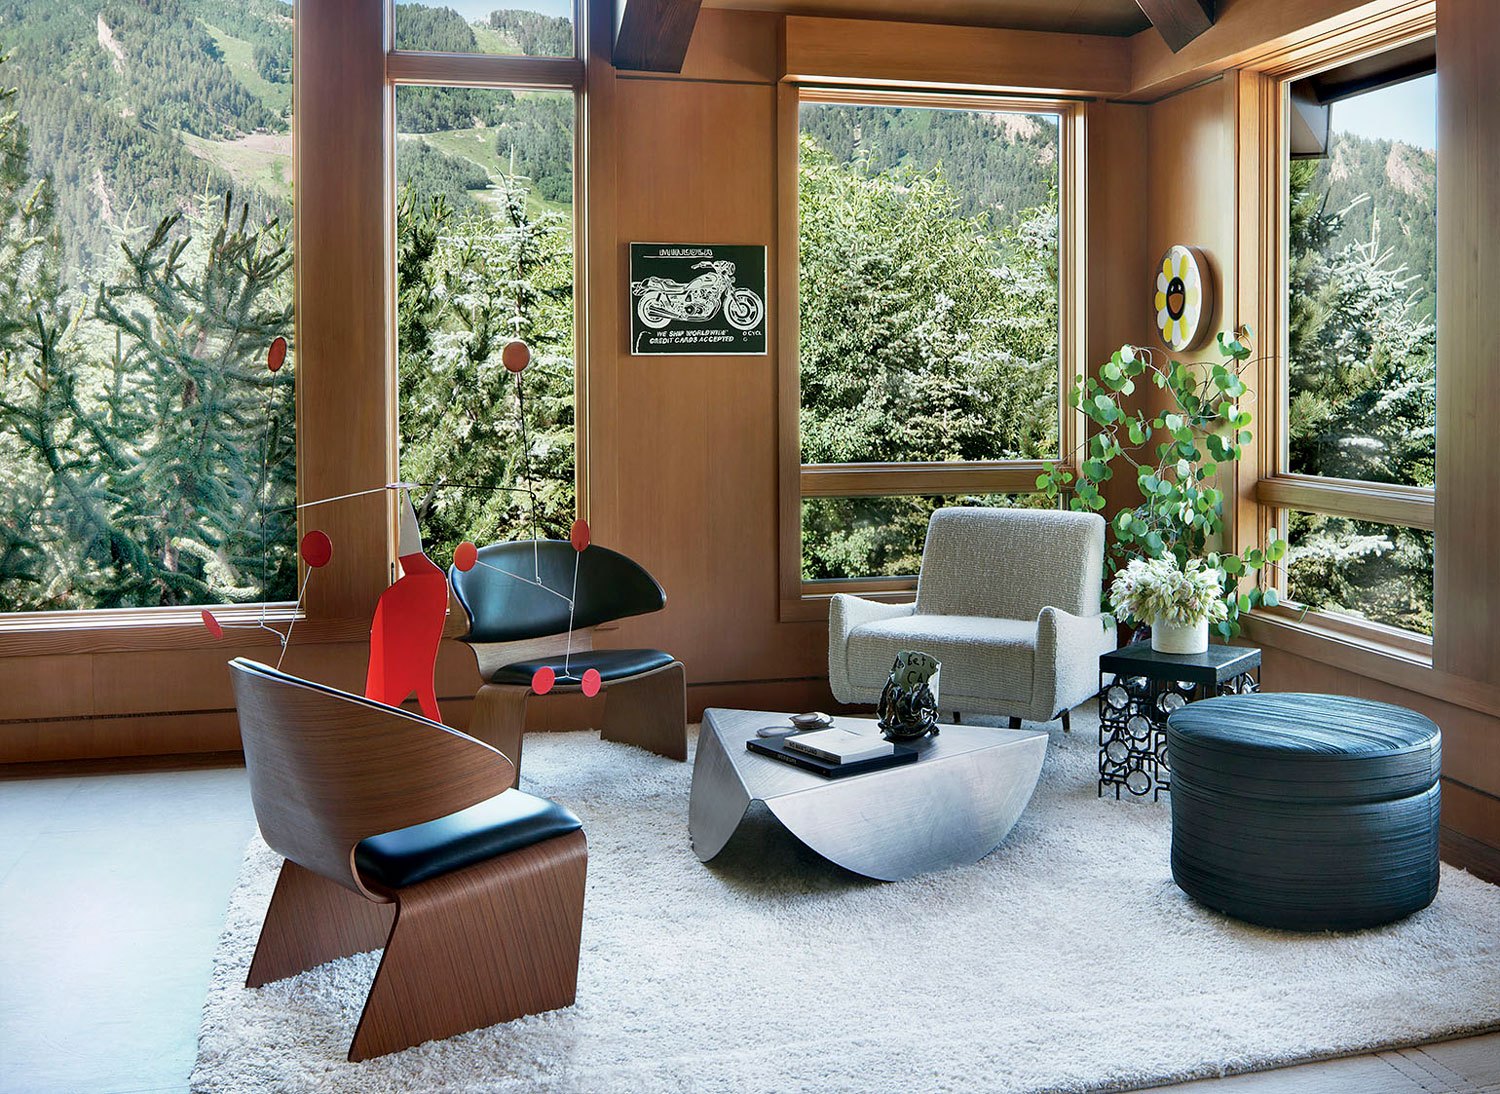 Hanging in a corner of the living room are small works by Andy Warhol and Takashi Murakami, while the Alexander Calder sculpture is perched between vintage Hans Olsen chairs. Joining them are a Xandre Kriel cocktail table, a Jorge Zalszupin armchair from Espasso, and a side table by Christophe Côme; the rug is by Beauvais Carpets.